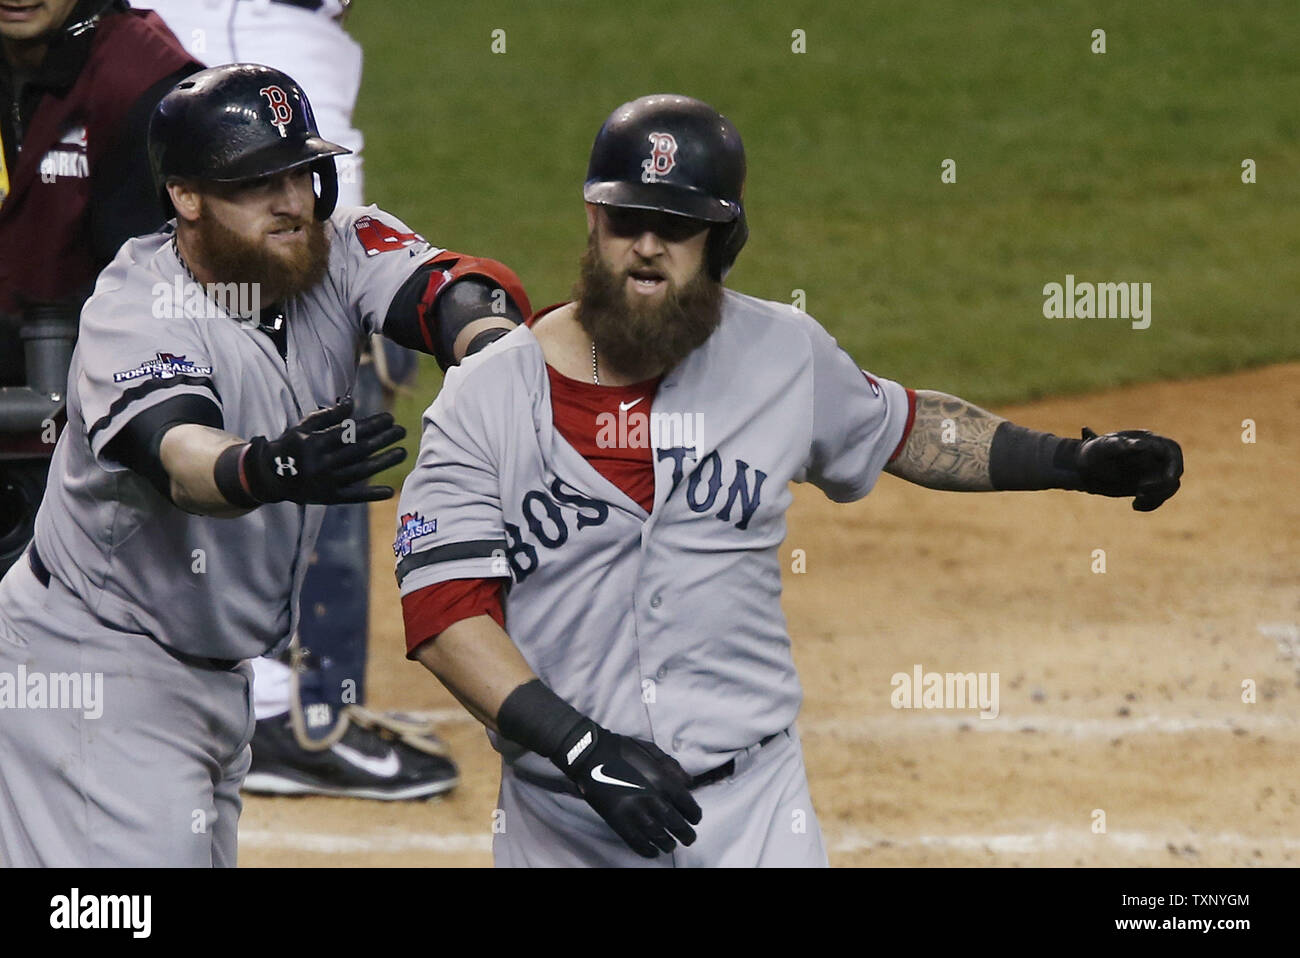 Boston Red Sox's Jonny Gomes (L) congratulates Mike Napoli after Napoli hit  a solo home run during the second inning of Game 5 of the American League  Championship Series against the Detroit